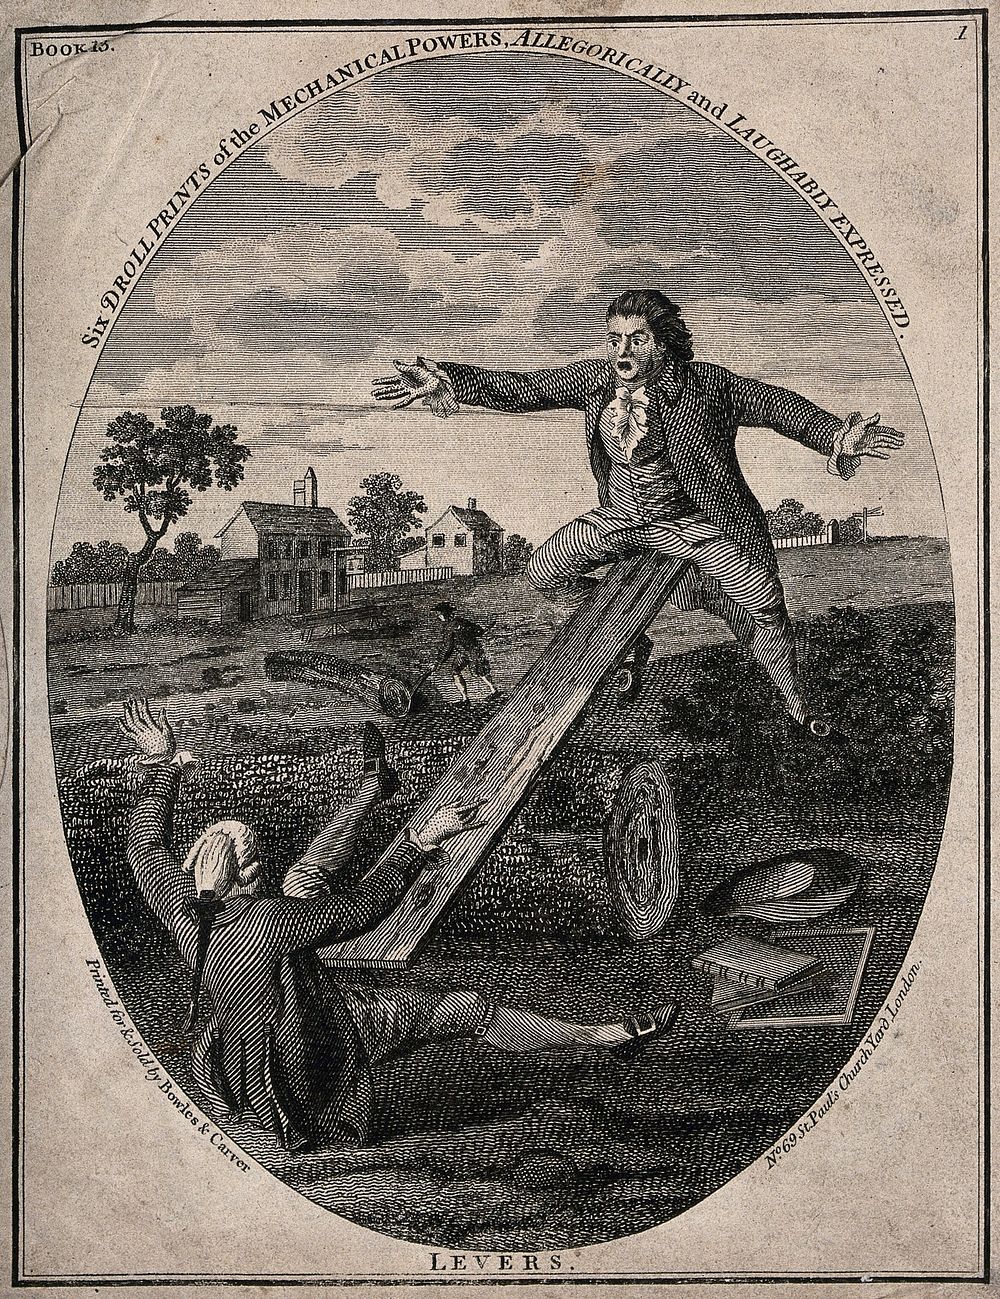 Two men are using a plank over a large log as a see-saw; representing the mechanics of levers. Engraving.